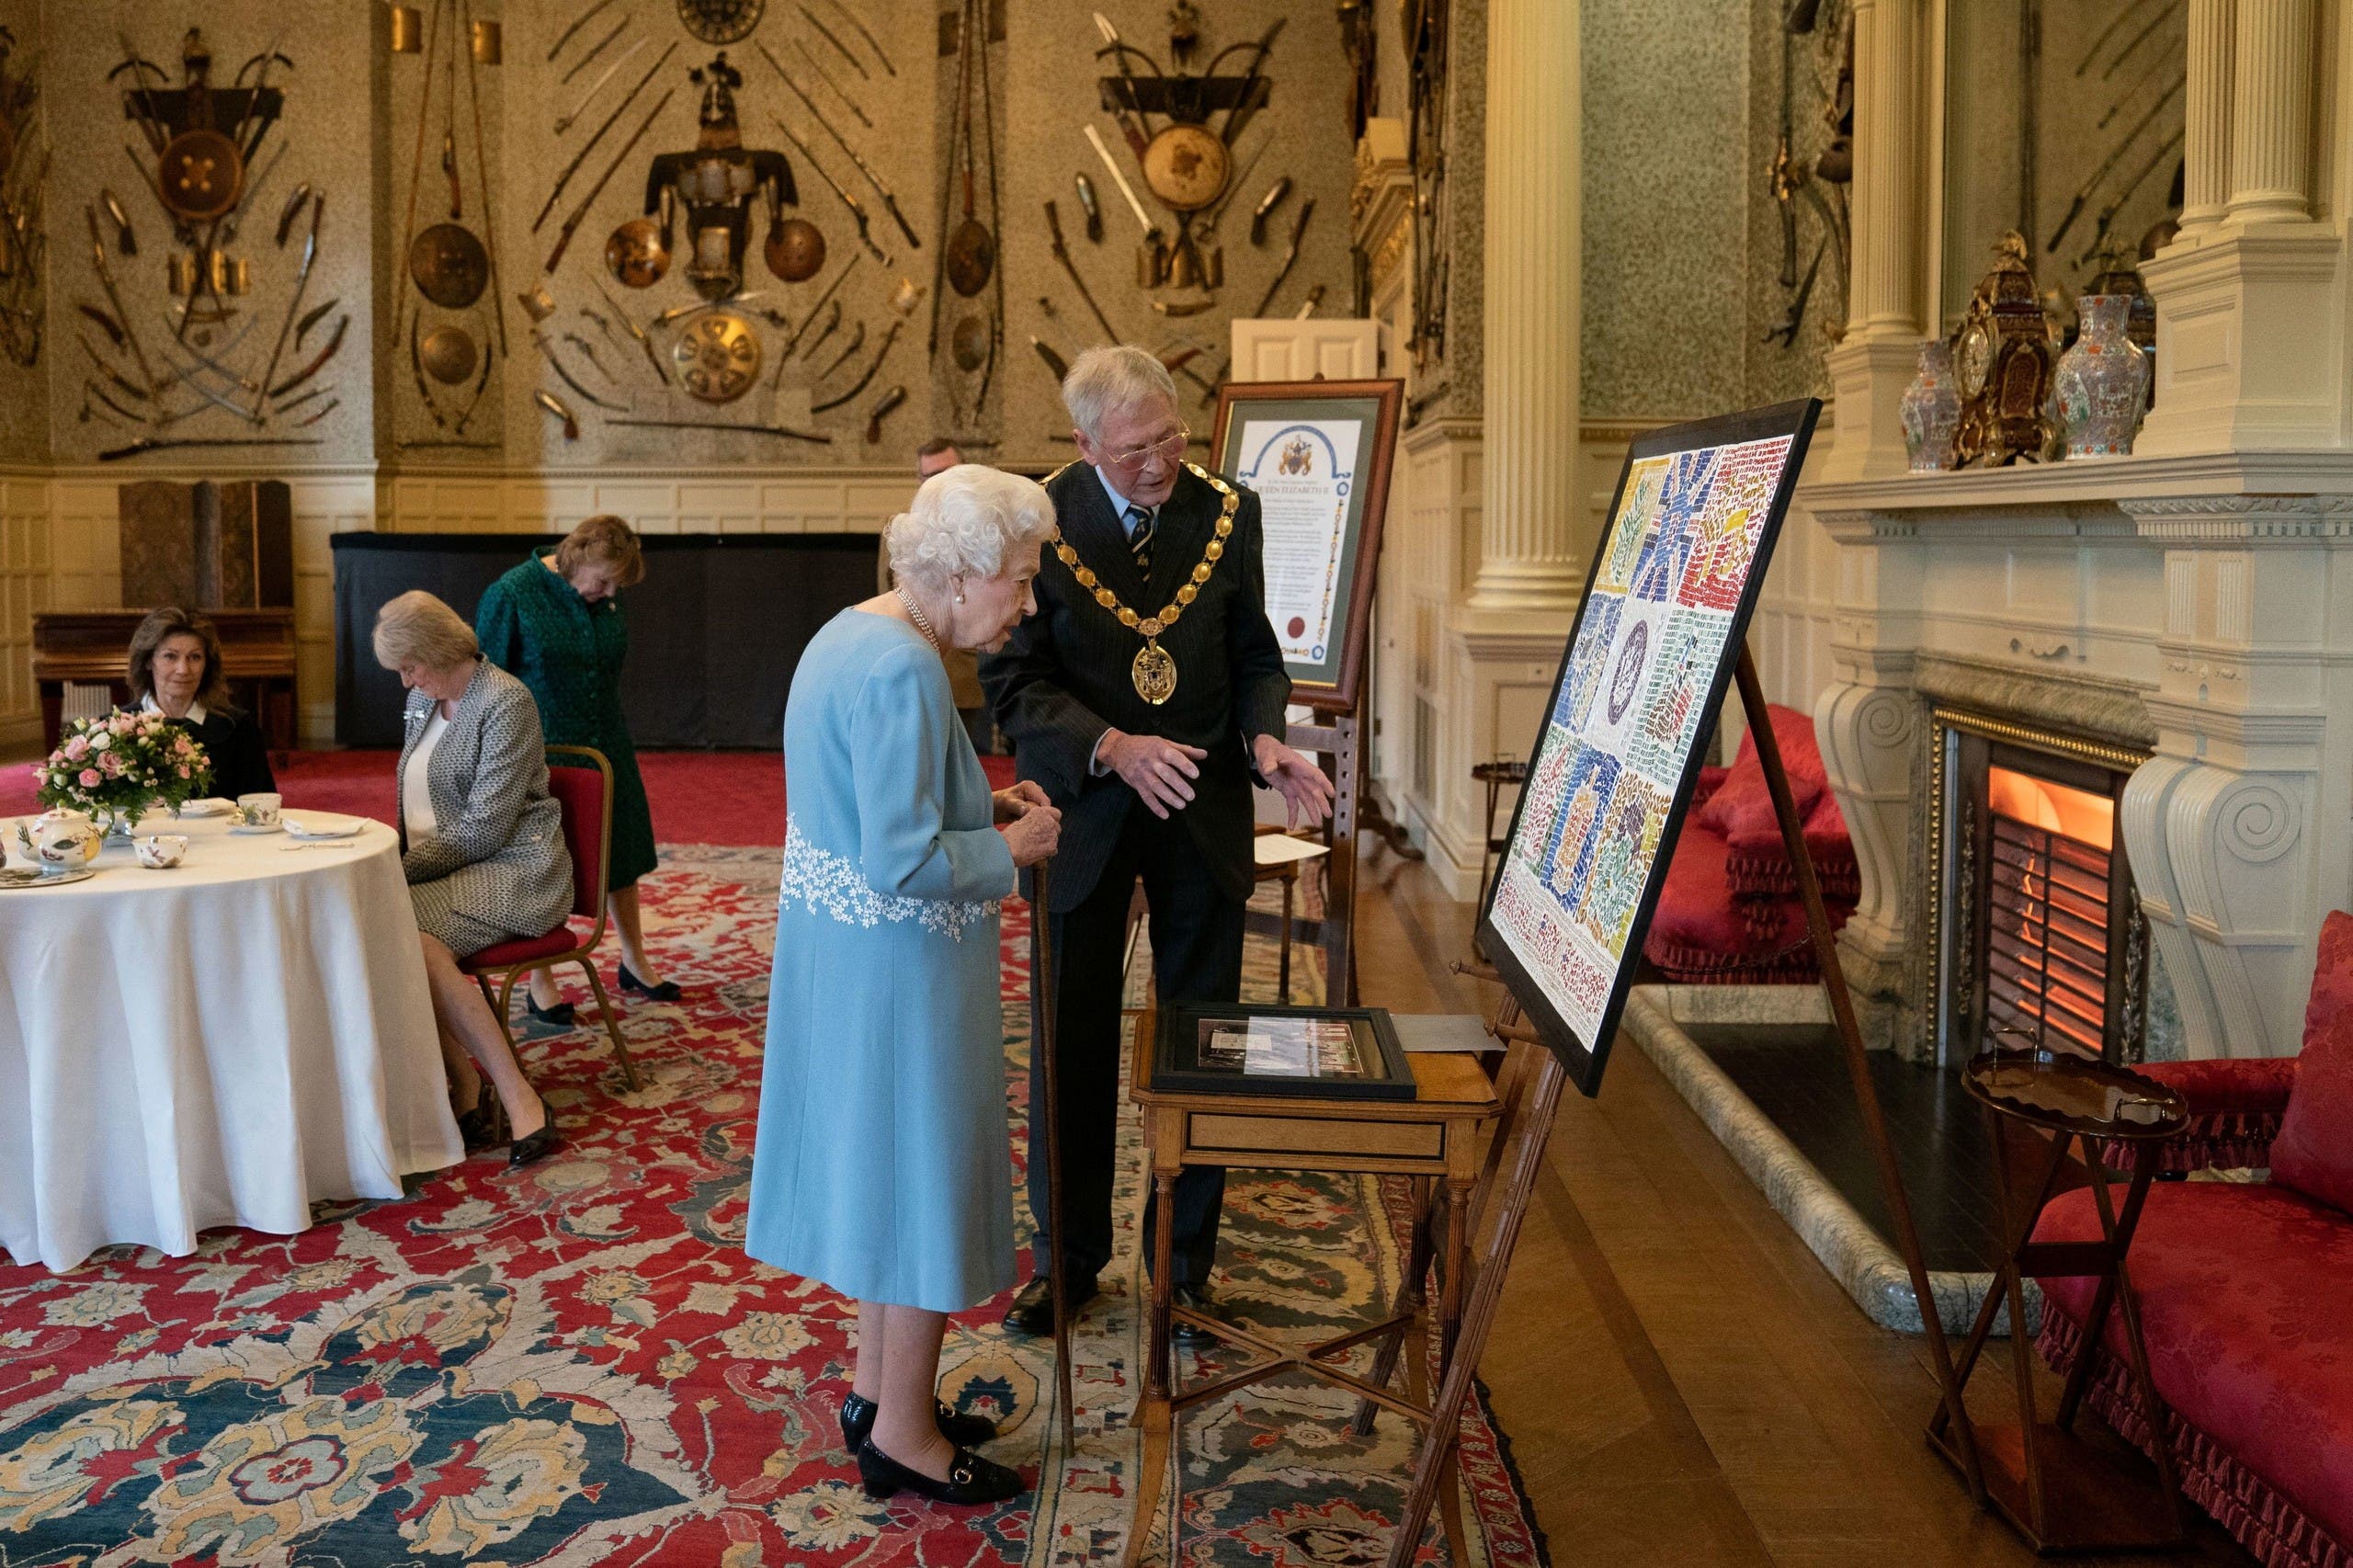 Britain's Queen Elizabeth attends a reception in the Ballroom of Sandringham House which is the Queen's Norfolk residence, with representatives from local community groups to celebrate the start of the Platinum Jubilee, in Sandringham, Britain, February 5, 2022. (Reuters)